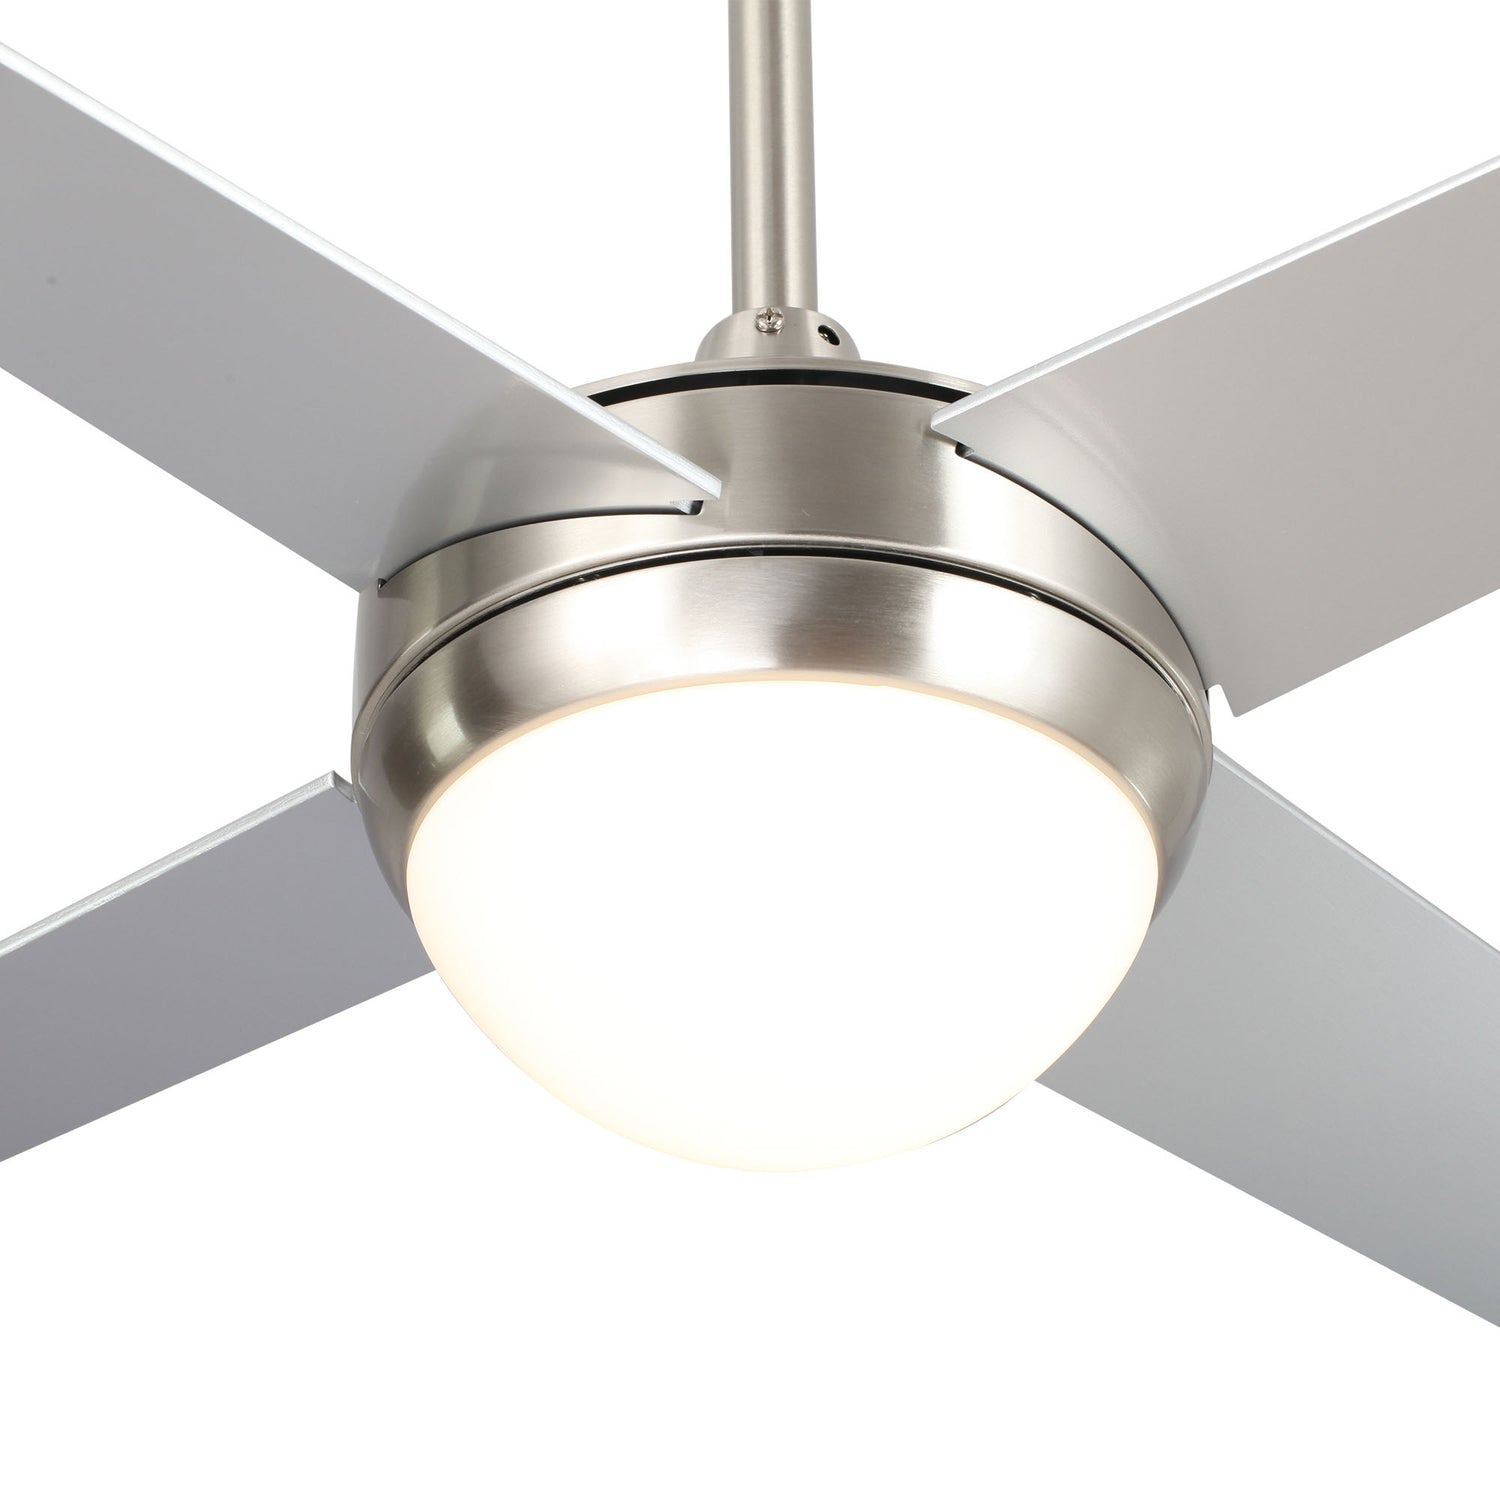 Carro Nova 48 inch Smart Ceiling Fan With LED Light Kit-silver base with white blades. 